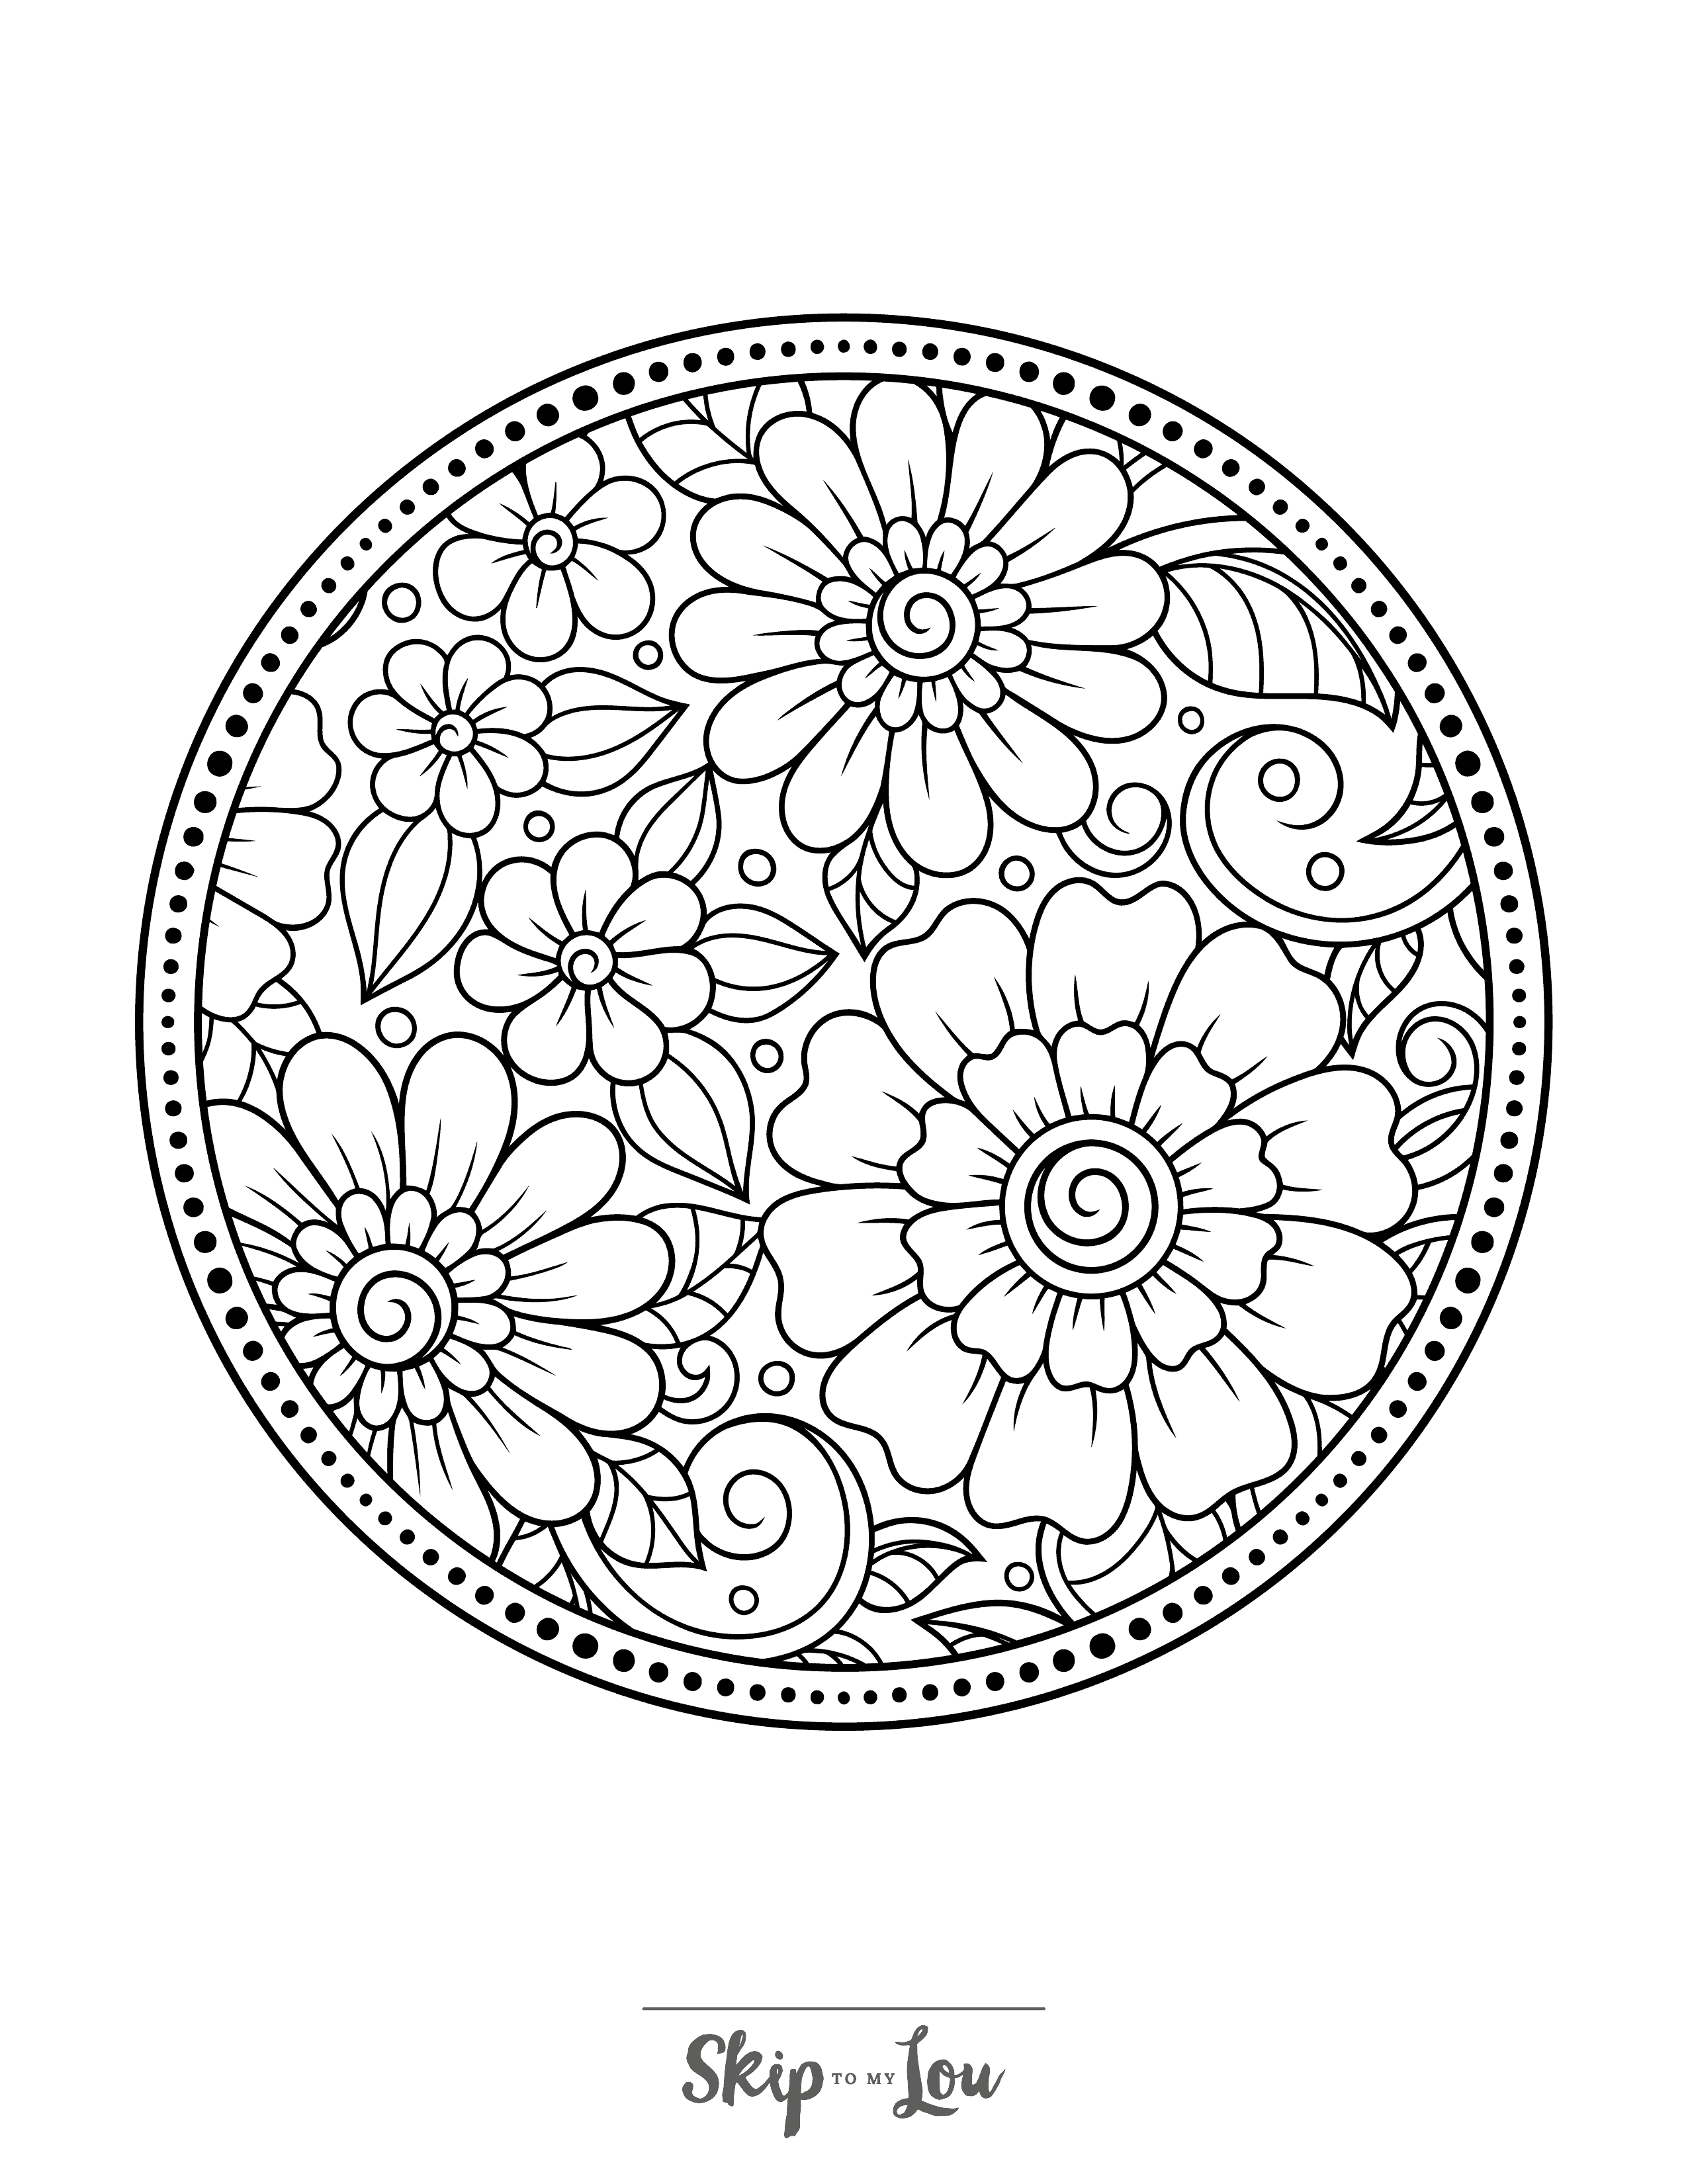 Fun free adult coloring pages skip to my lou